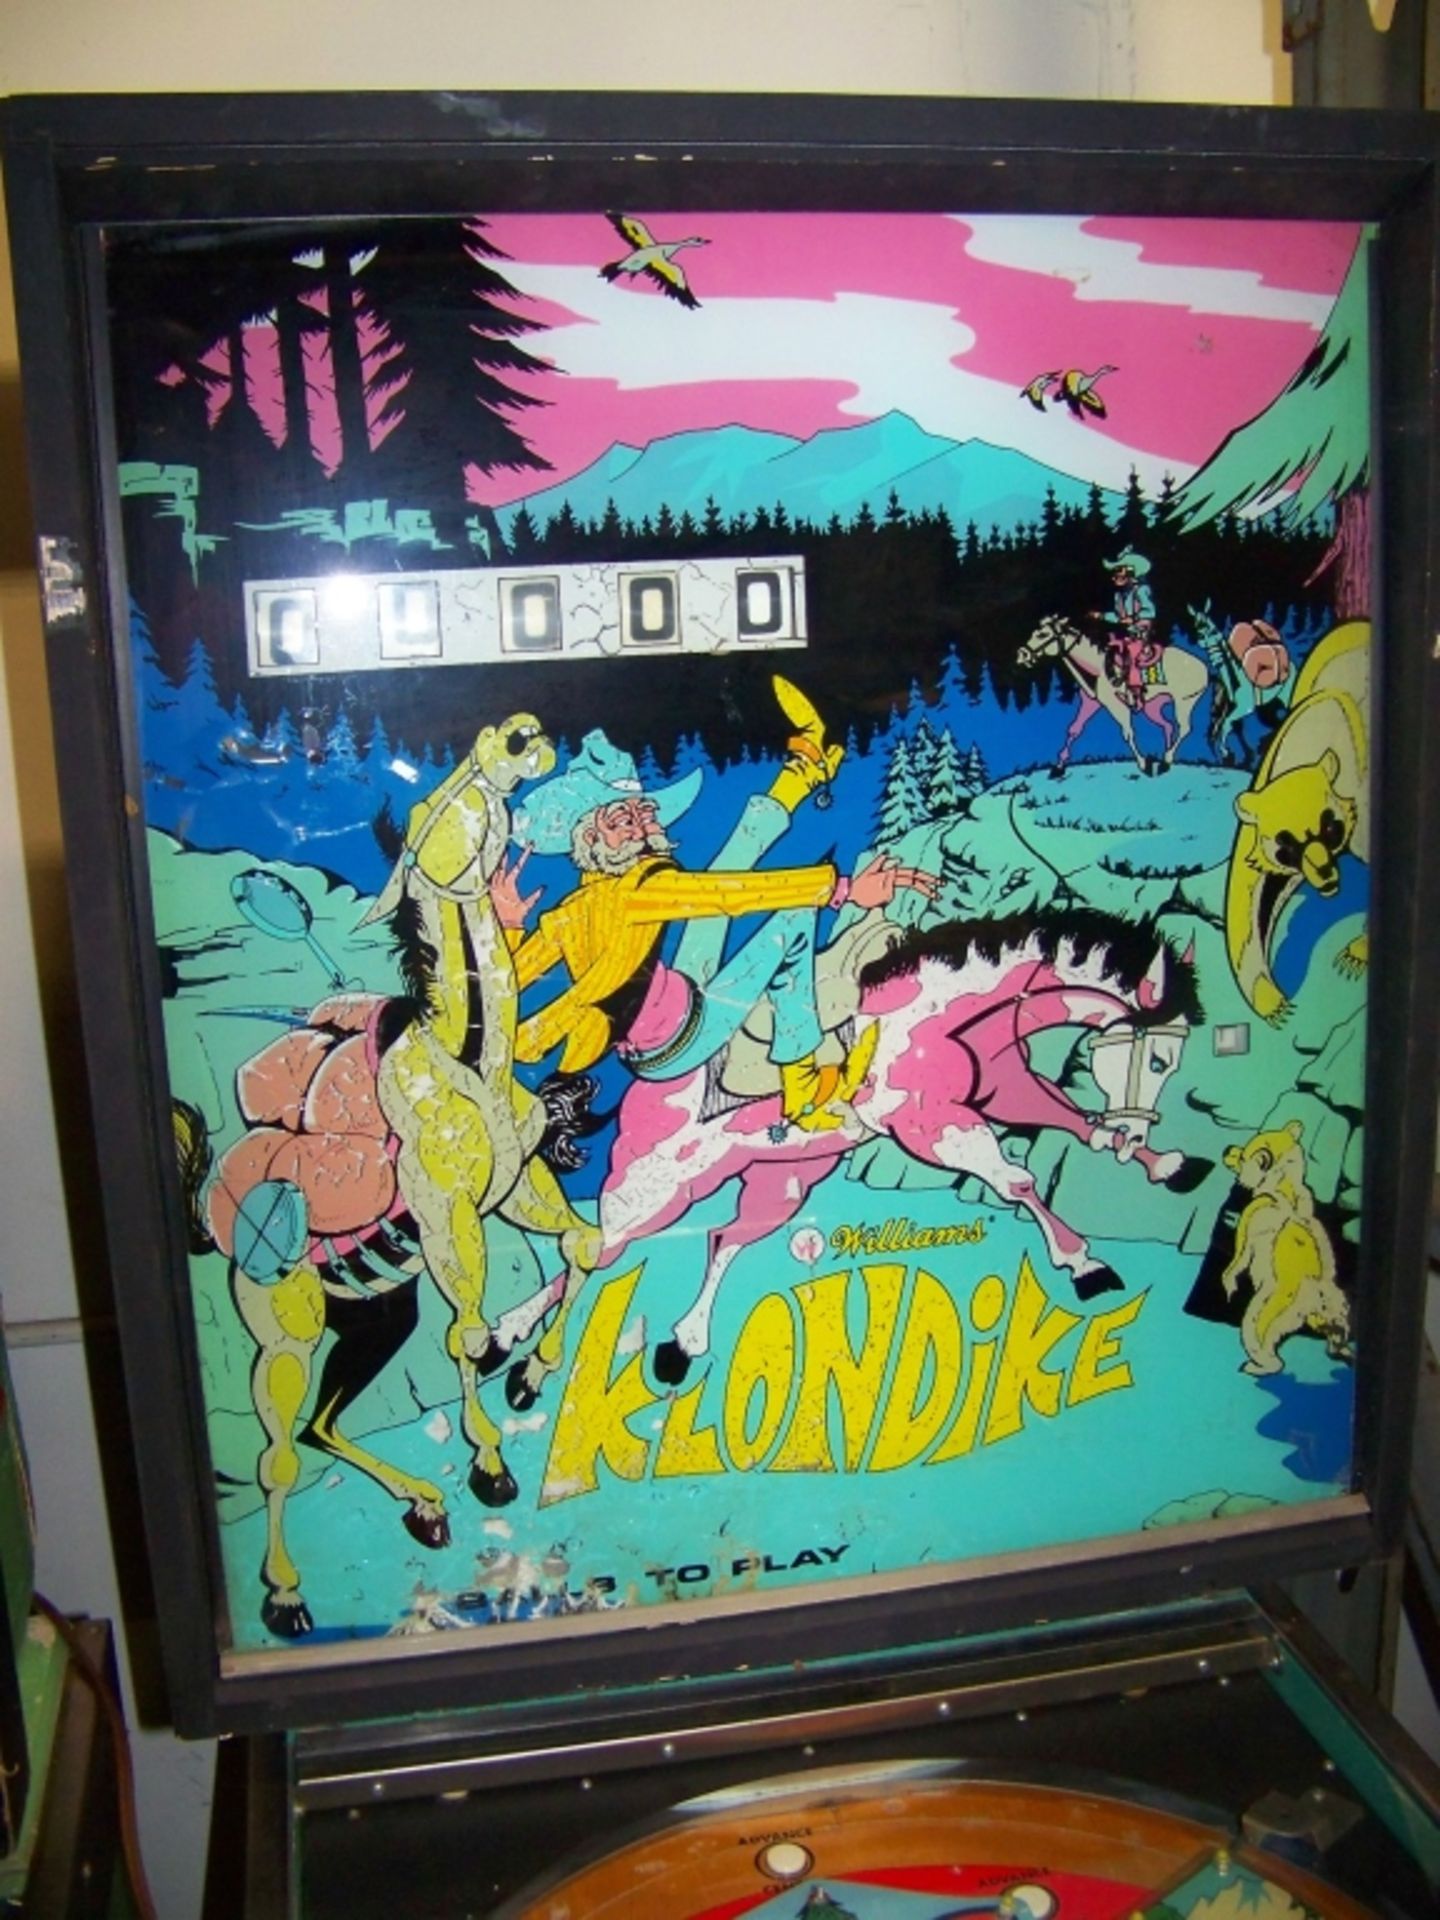 KLONDIKE PINBALL MACHINE WILLIAMS 1971 Item is in used condition. Evidence of wear and commercial